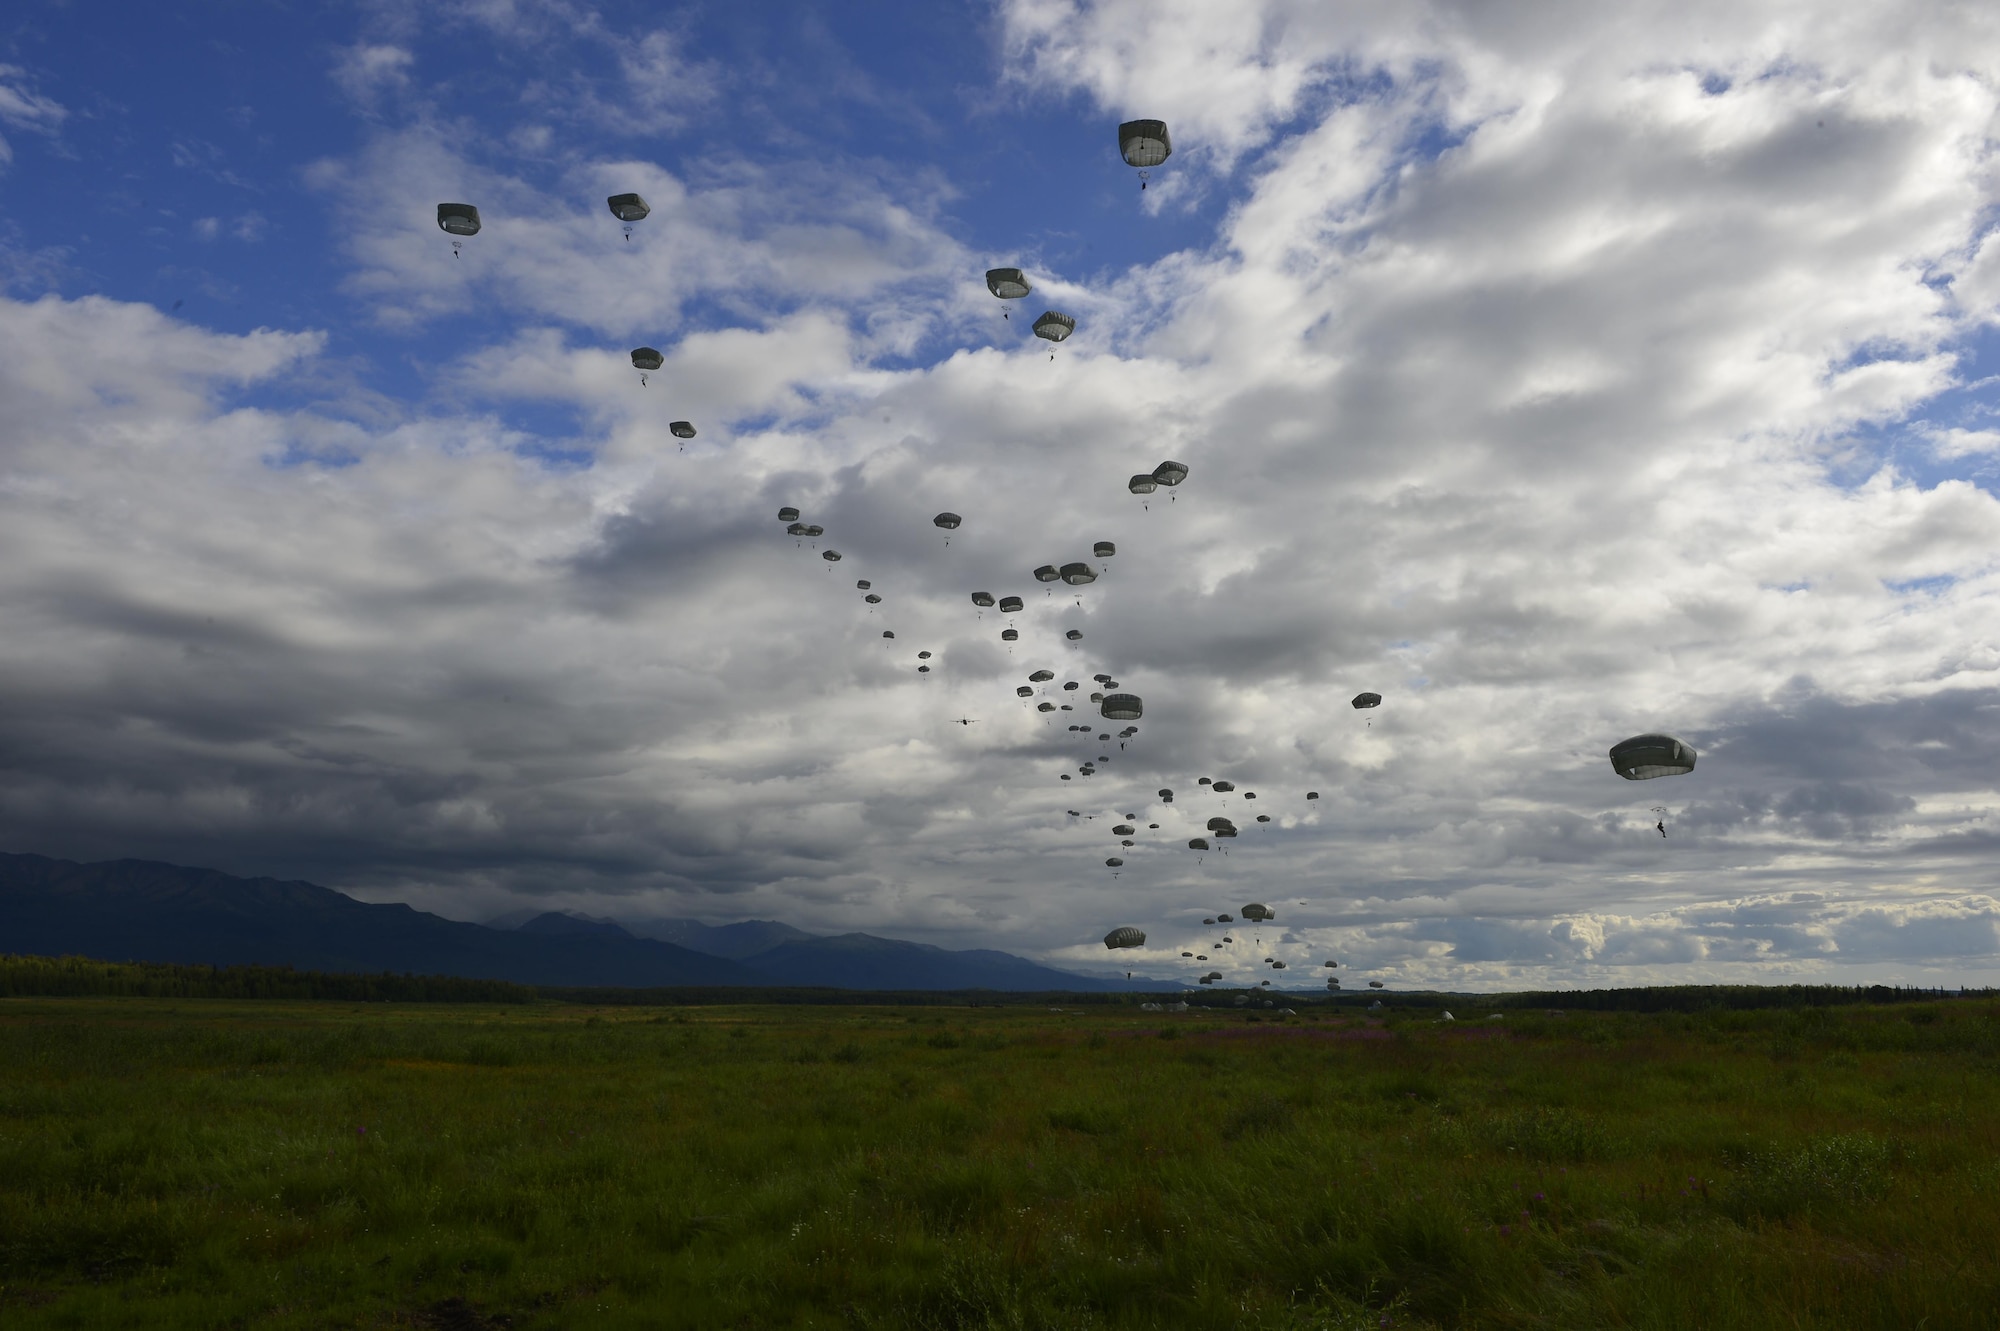 U.S. Army personnel from the 501st Airborne Infantry Regiment assigned to Fort Richardson land in the drop zone July 22, 2016, at Joint Base Elmendorf-Richardson, Alaska. The 41st Airlift Squadron conducted mountainous terrain training in Alaska and supported Exercise Artic Anvil. (U.S. Air Force photo by Senior Airman Kaylee Clark)